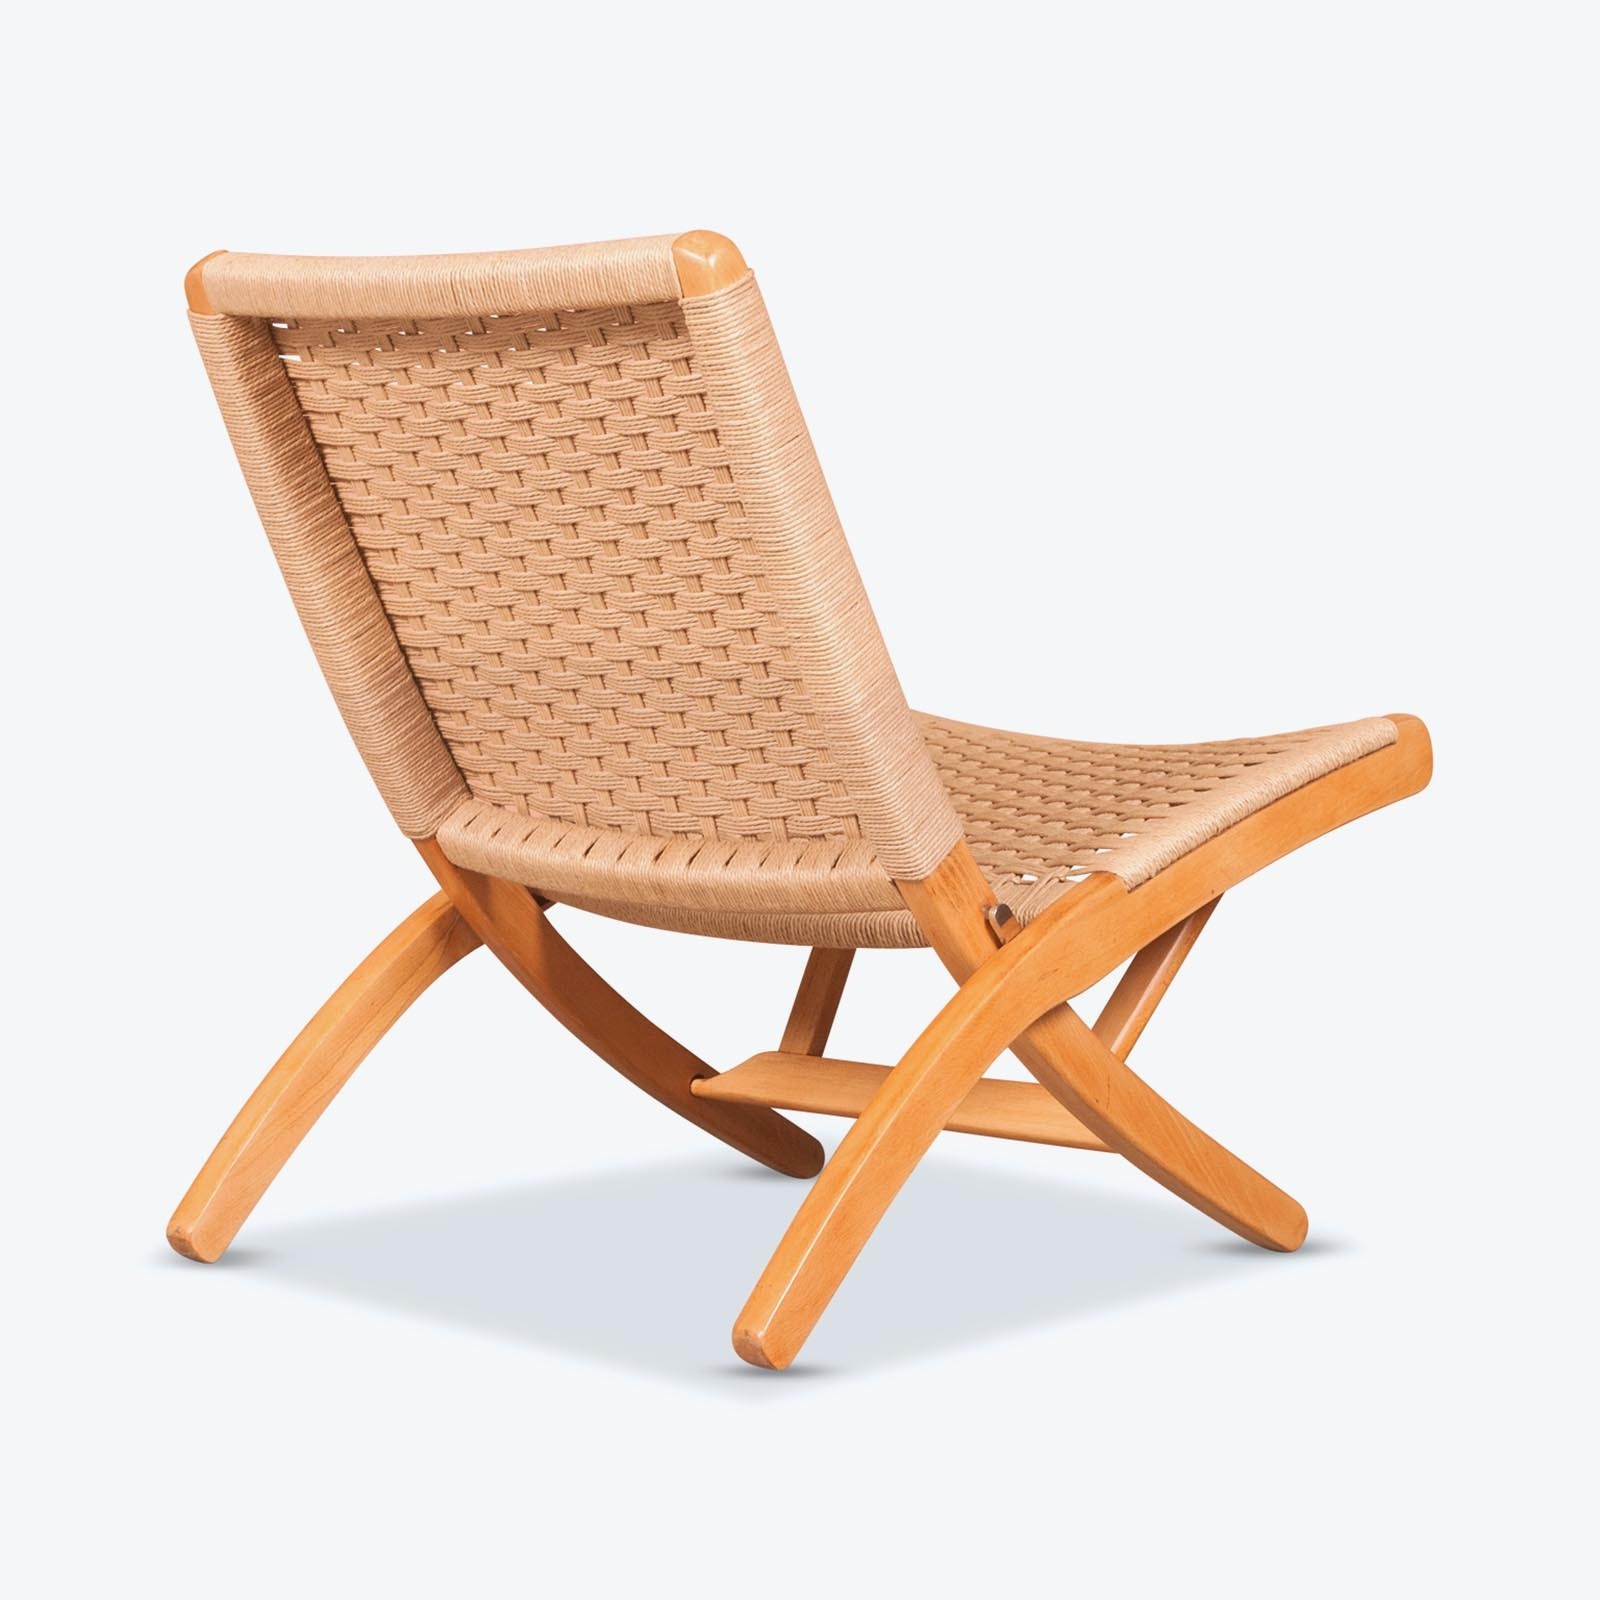 Japanese folding chair in the style of hans wegner with